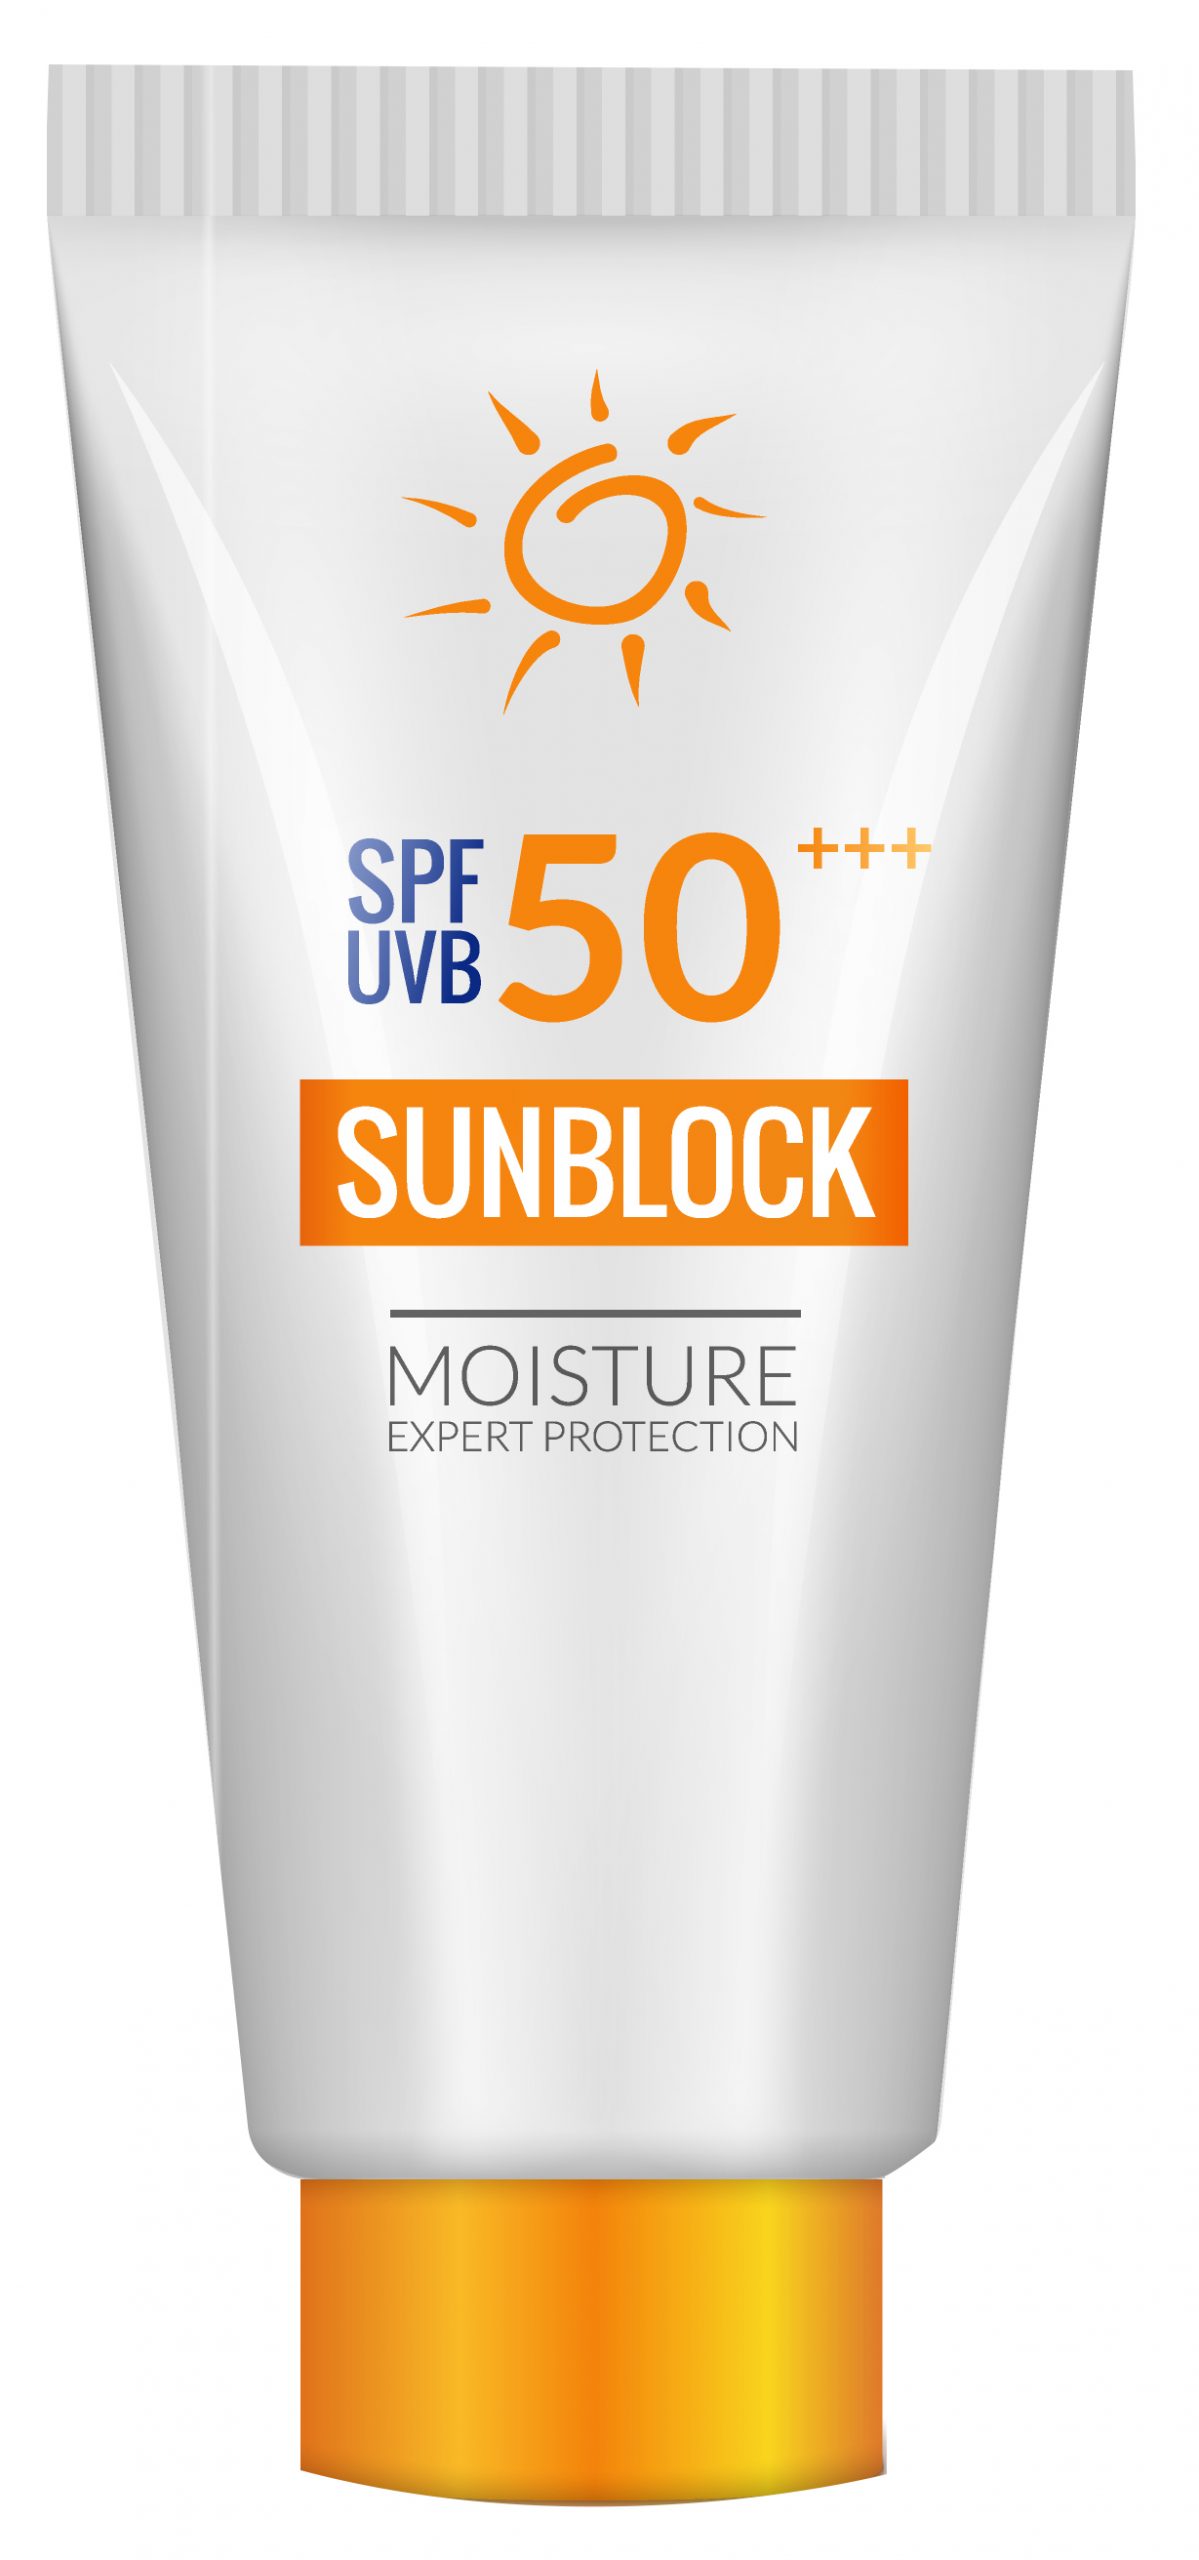 Use a safe sunscreen (including protective SPF lip balm), a broad-brim hat, sunglasses, gardening gloves, sturdy shoes and insect repellent when needed.